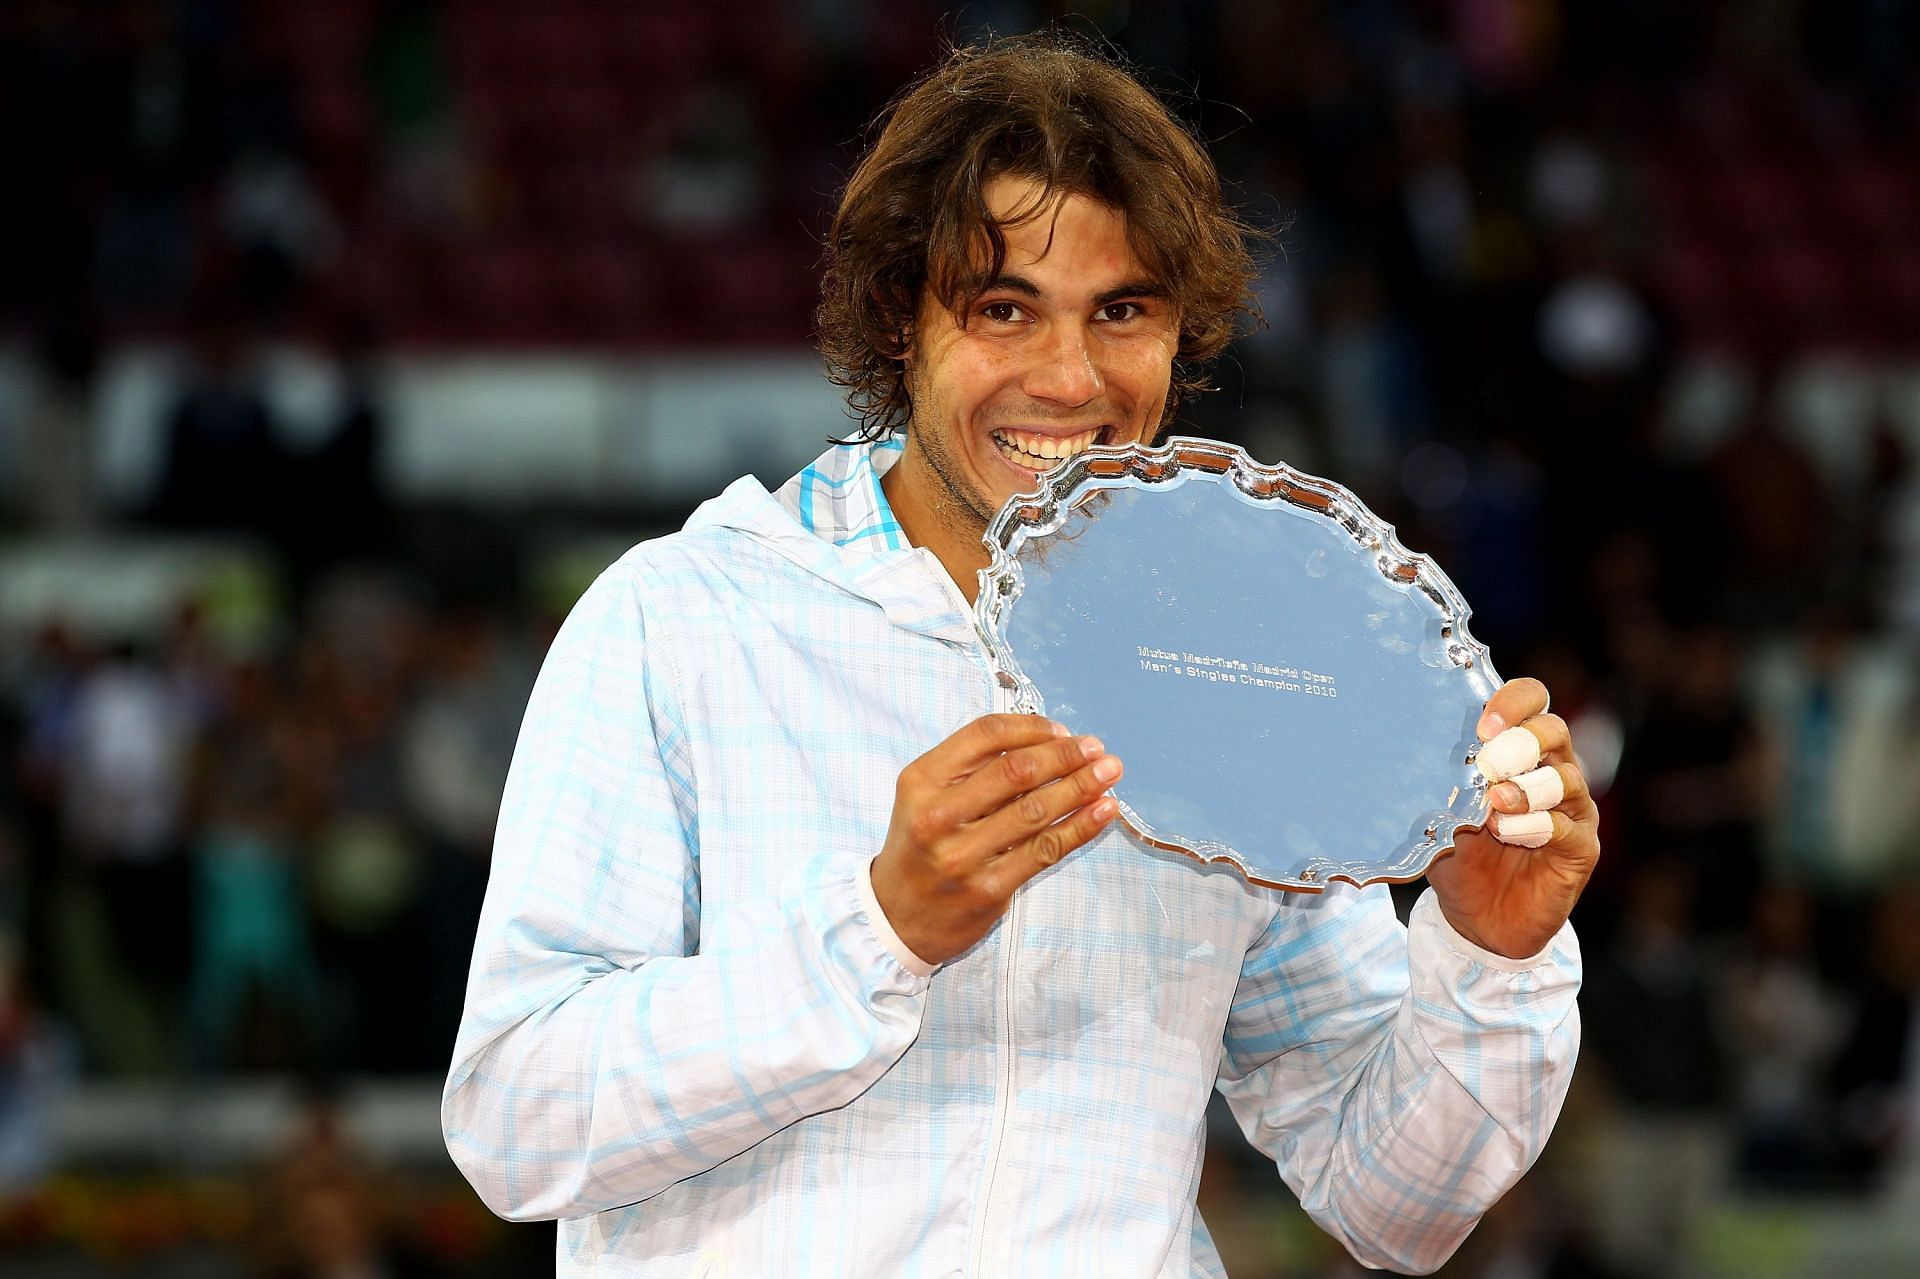 Rafael Nadal with the 2010 Mutua Madrilena Madrid Open winner&#039;s trophy.